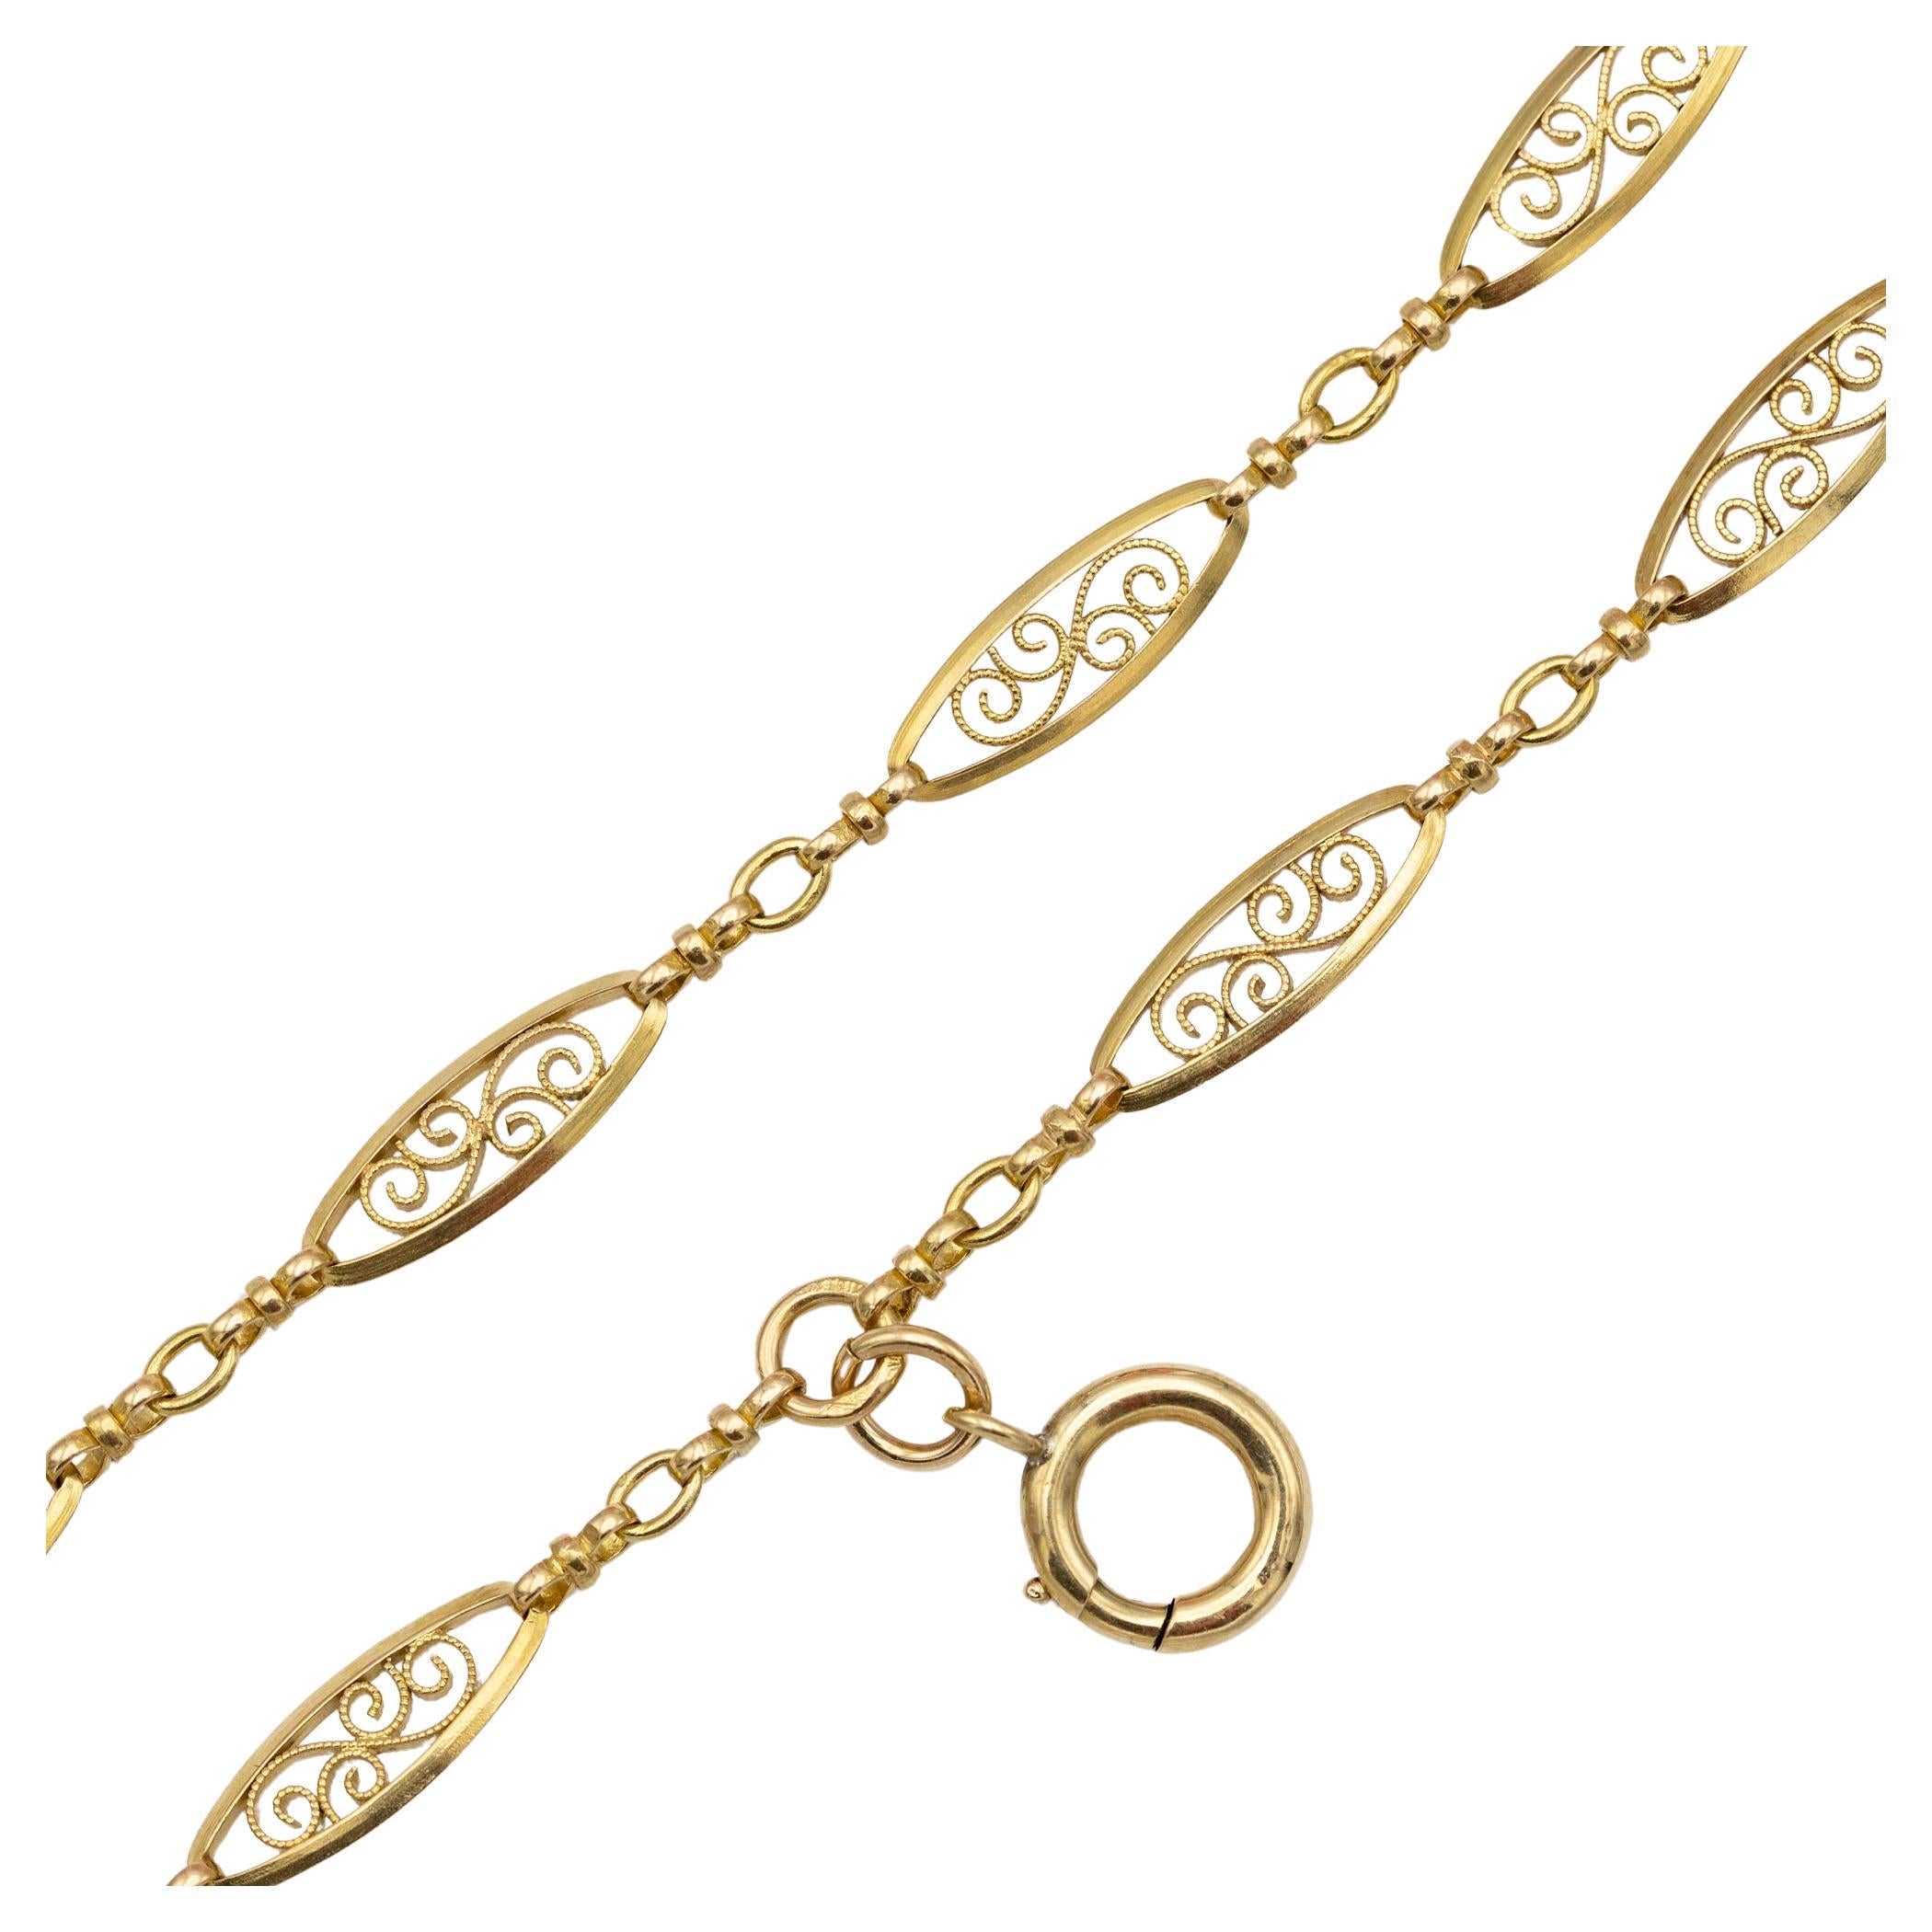 For sale is this lovely 18 K yellow gold Sautoire necklace that can be worn as a single or double stand thanks to an extra hoop in the middle of the necklace. This elegant necklace consists out alternating simpler and fancy looking links with lovely